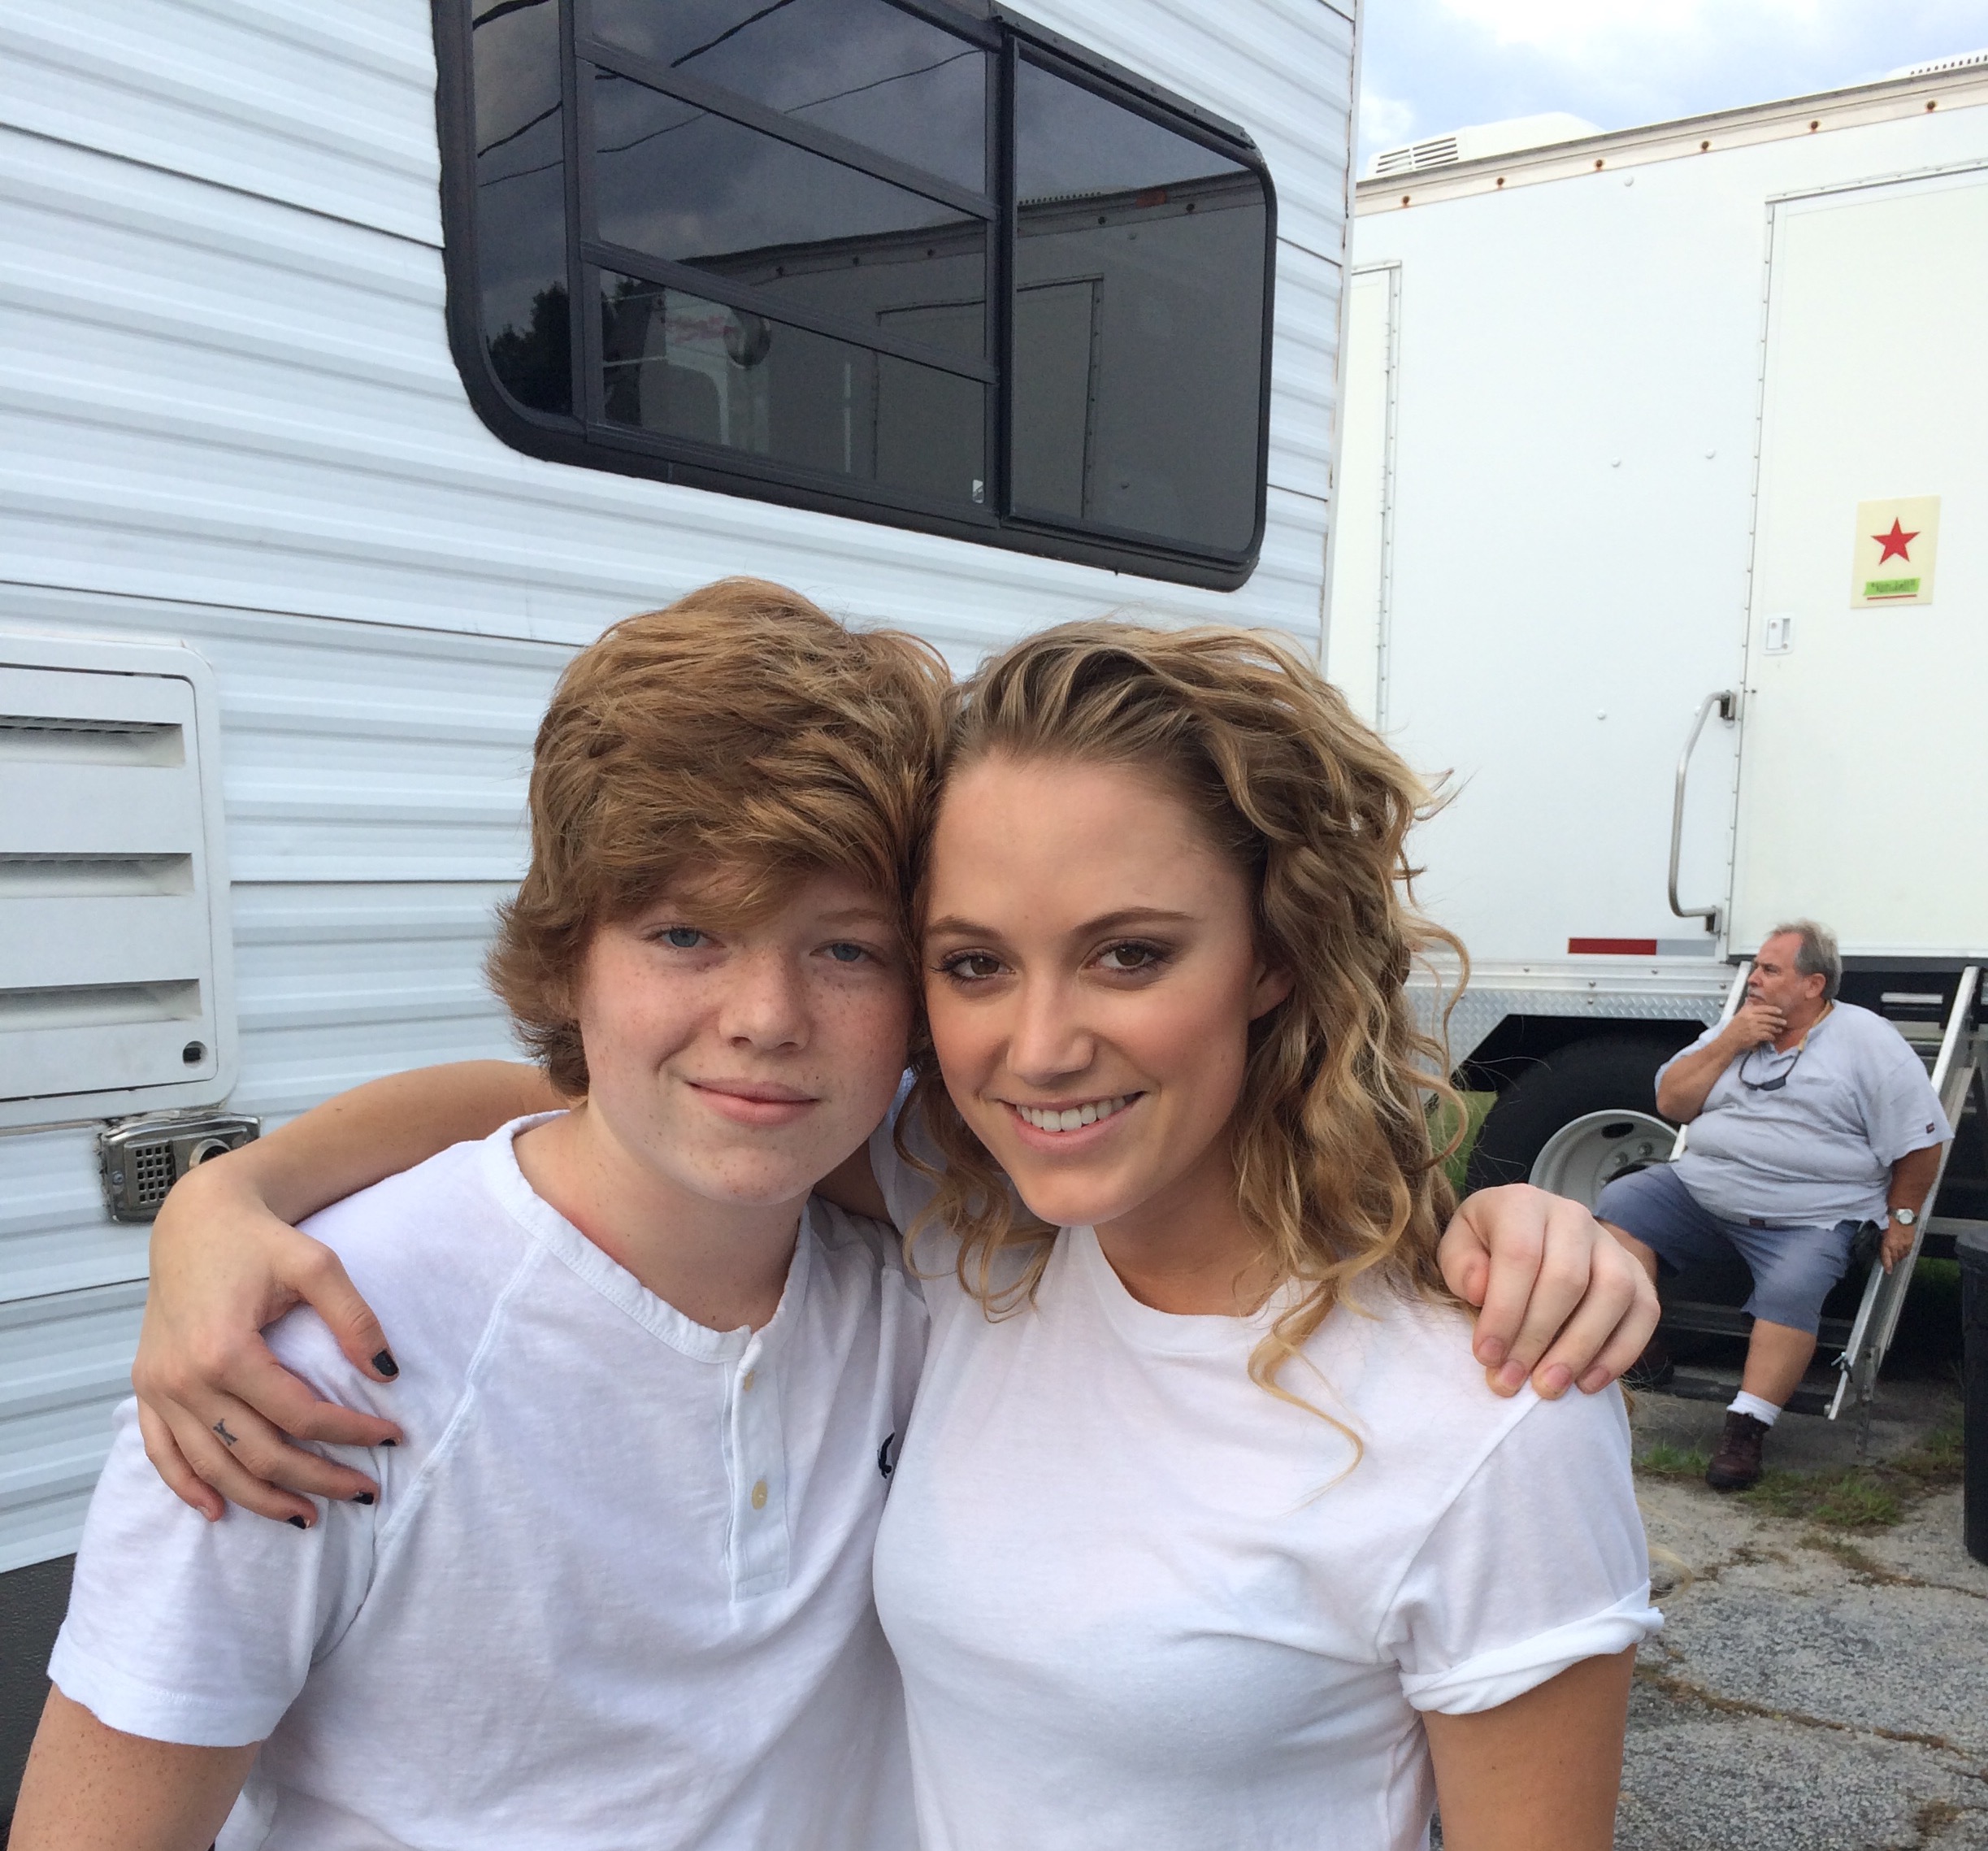 Excited to be working with Maika Monroe again on set of Hot Summer Nights!